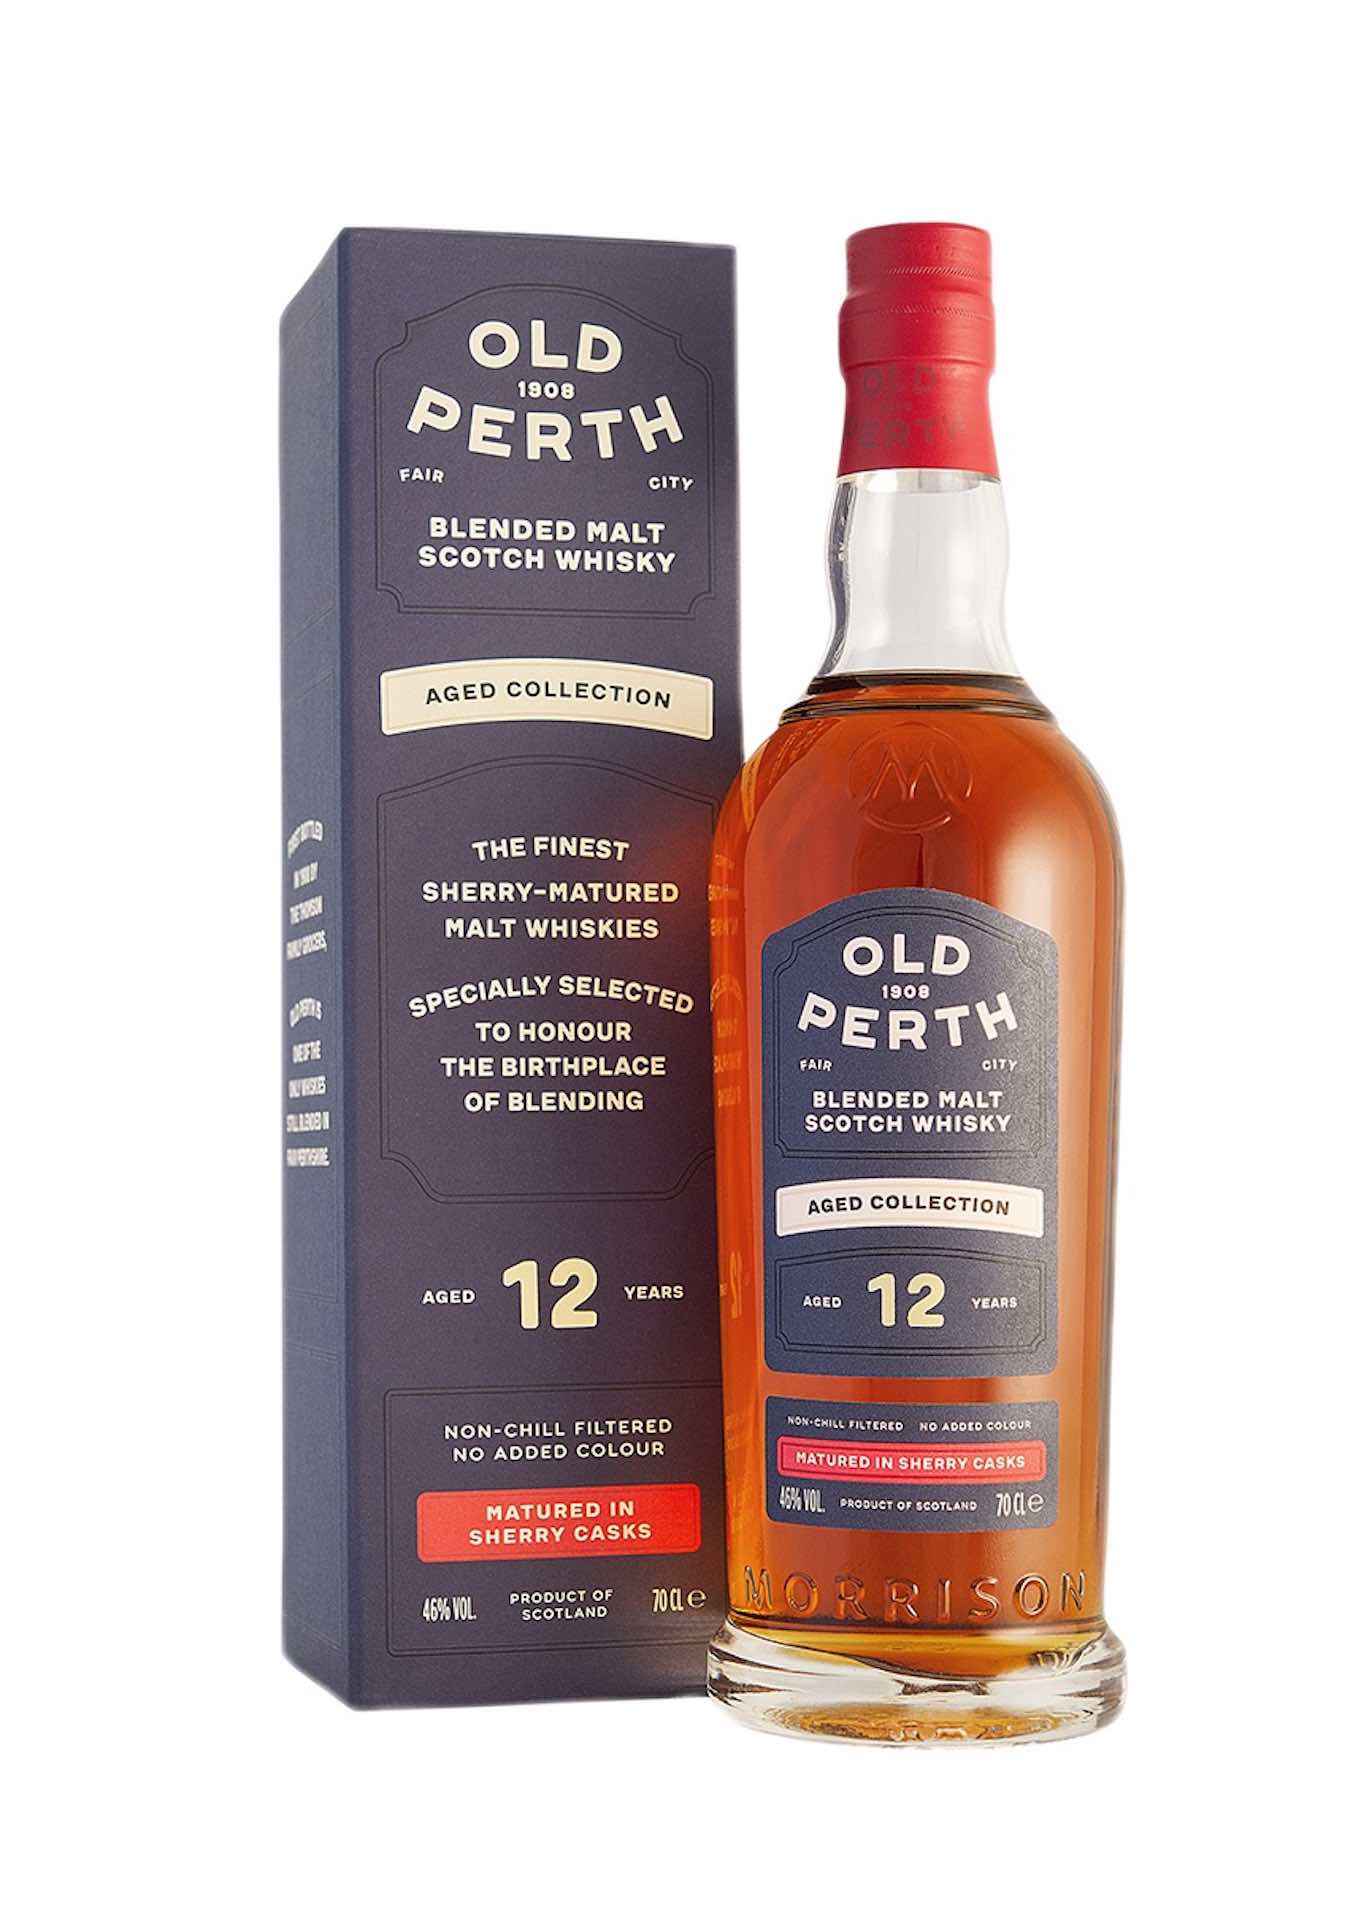 Old Perth 12 Year Old Sherry Cask Whisky, Wohltätigkeitsauktion